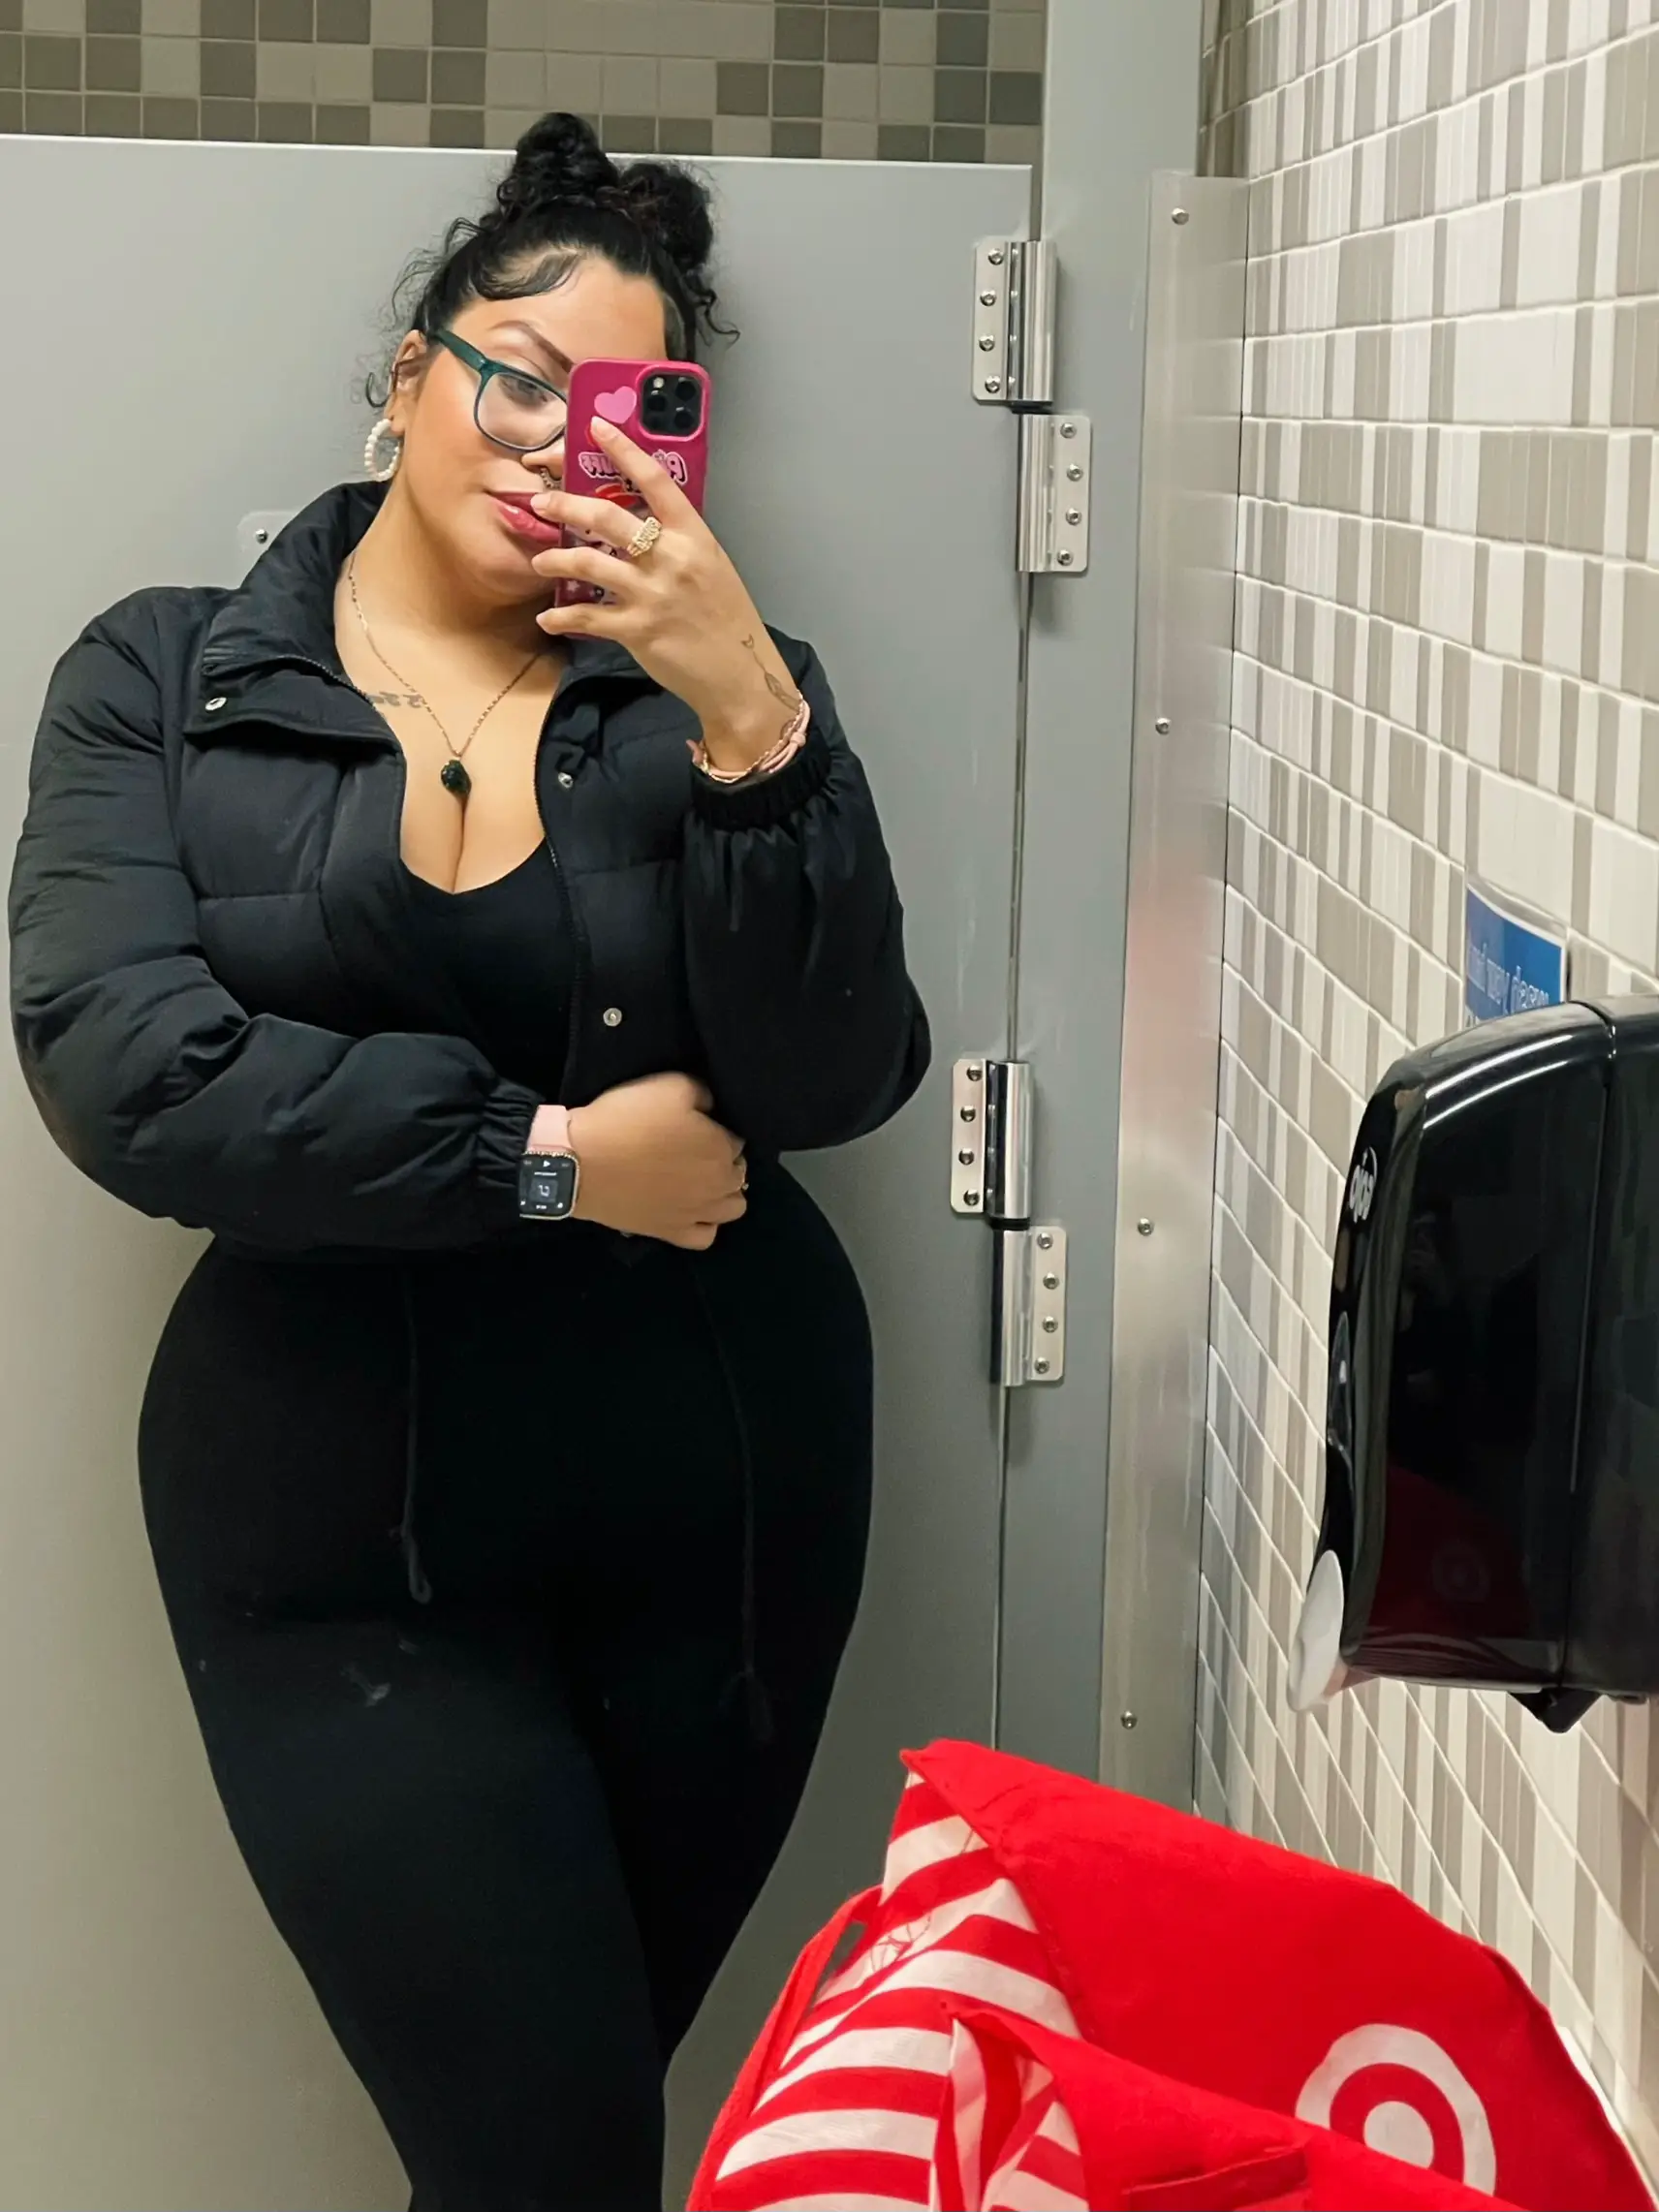 OC. Thick BBL latina. Side and back angles 🥵 - Tight Jeans - Forum